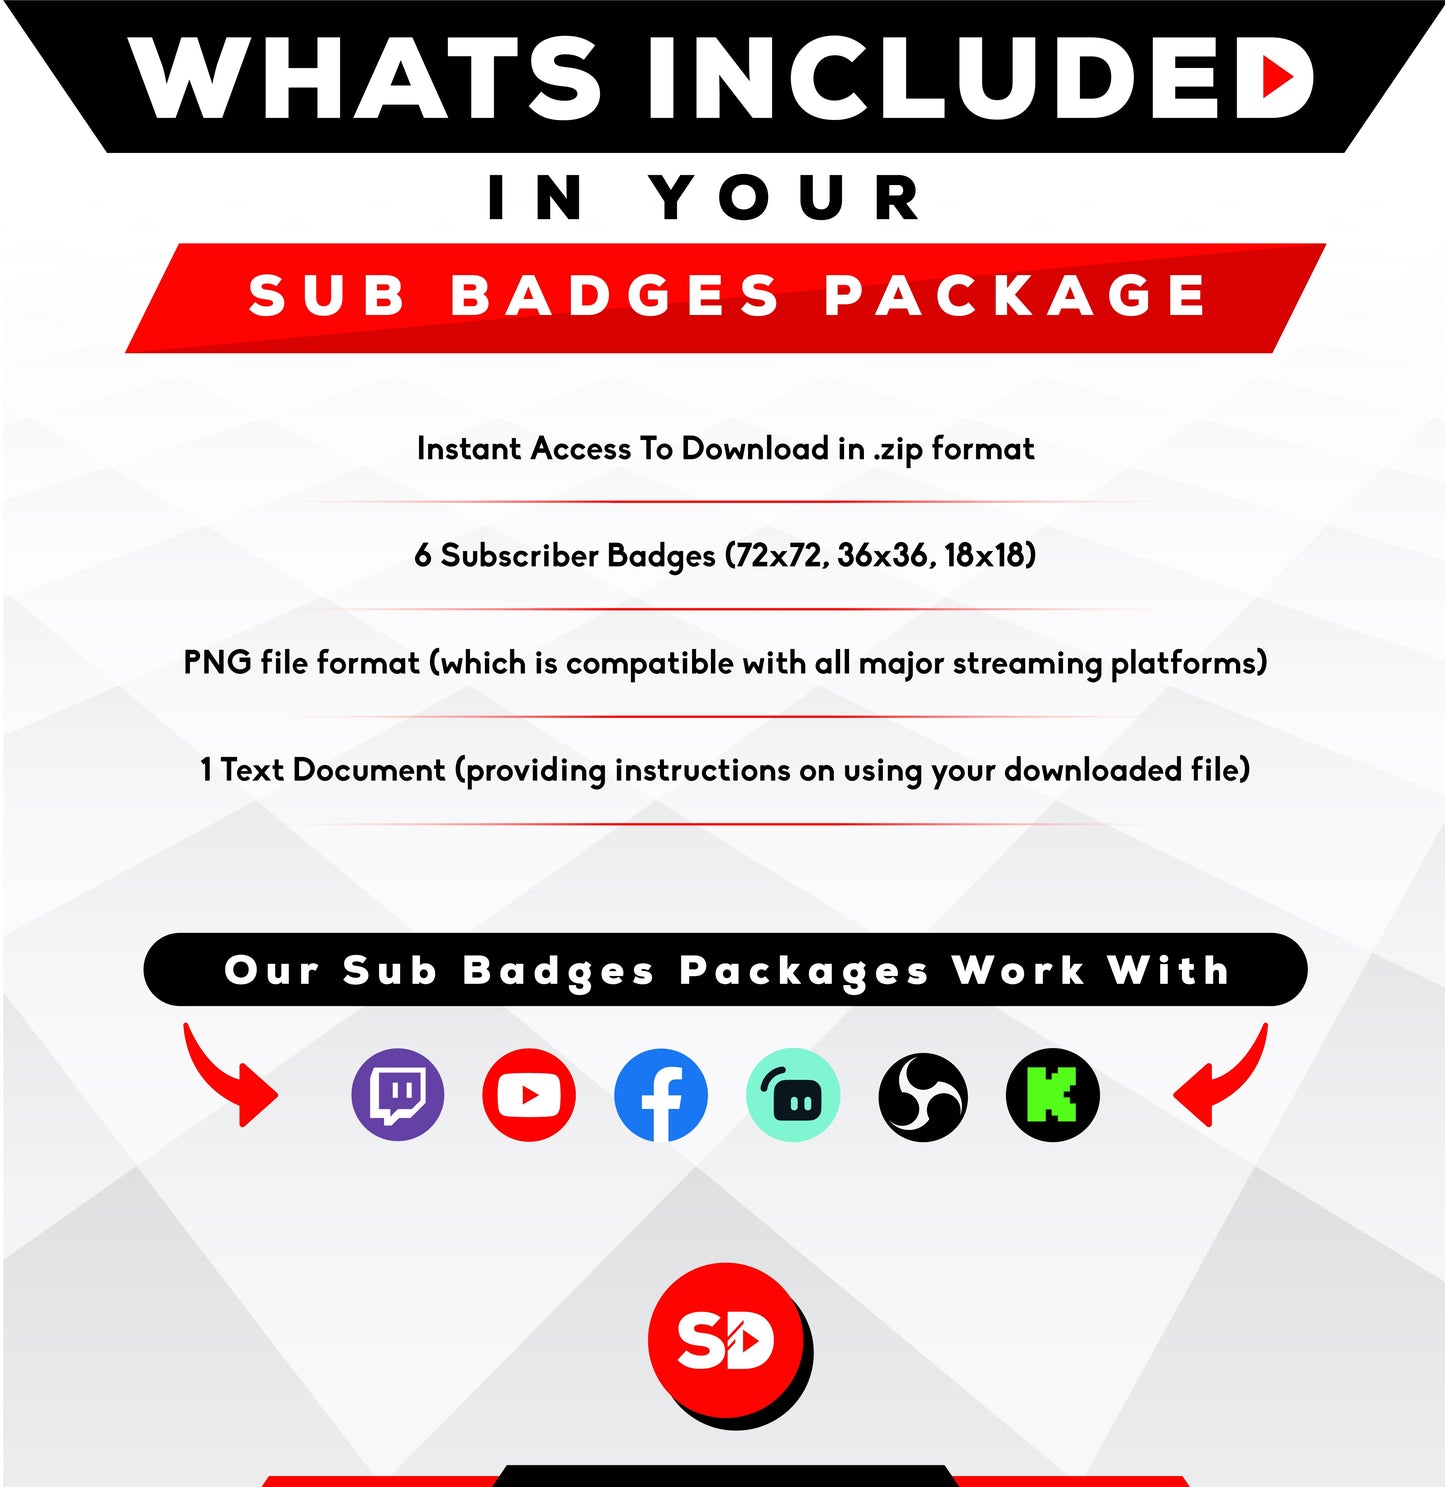 whats included in your package - sub badges - ducks - stream designz